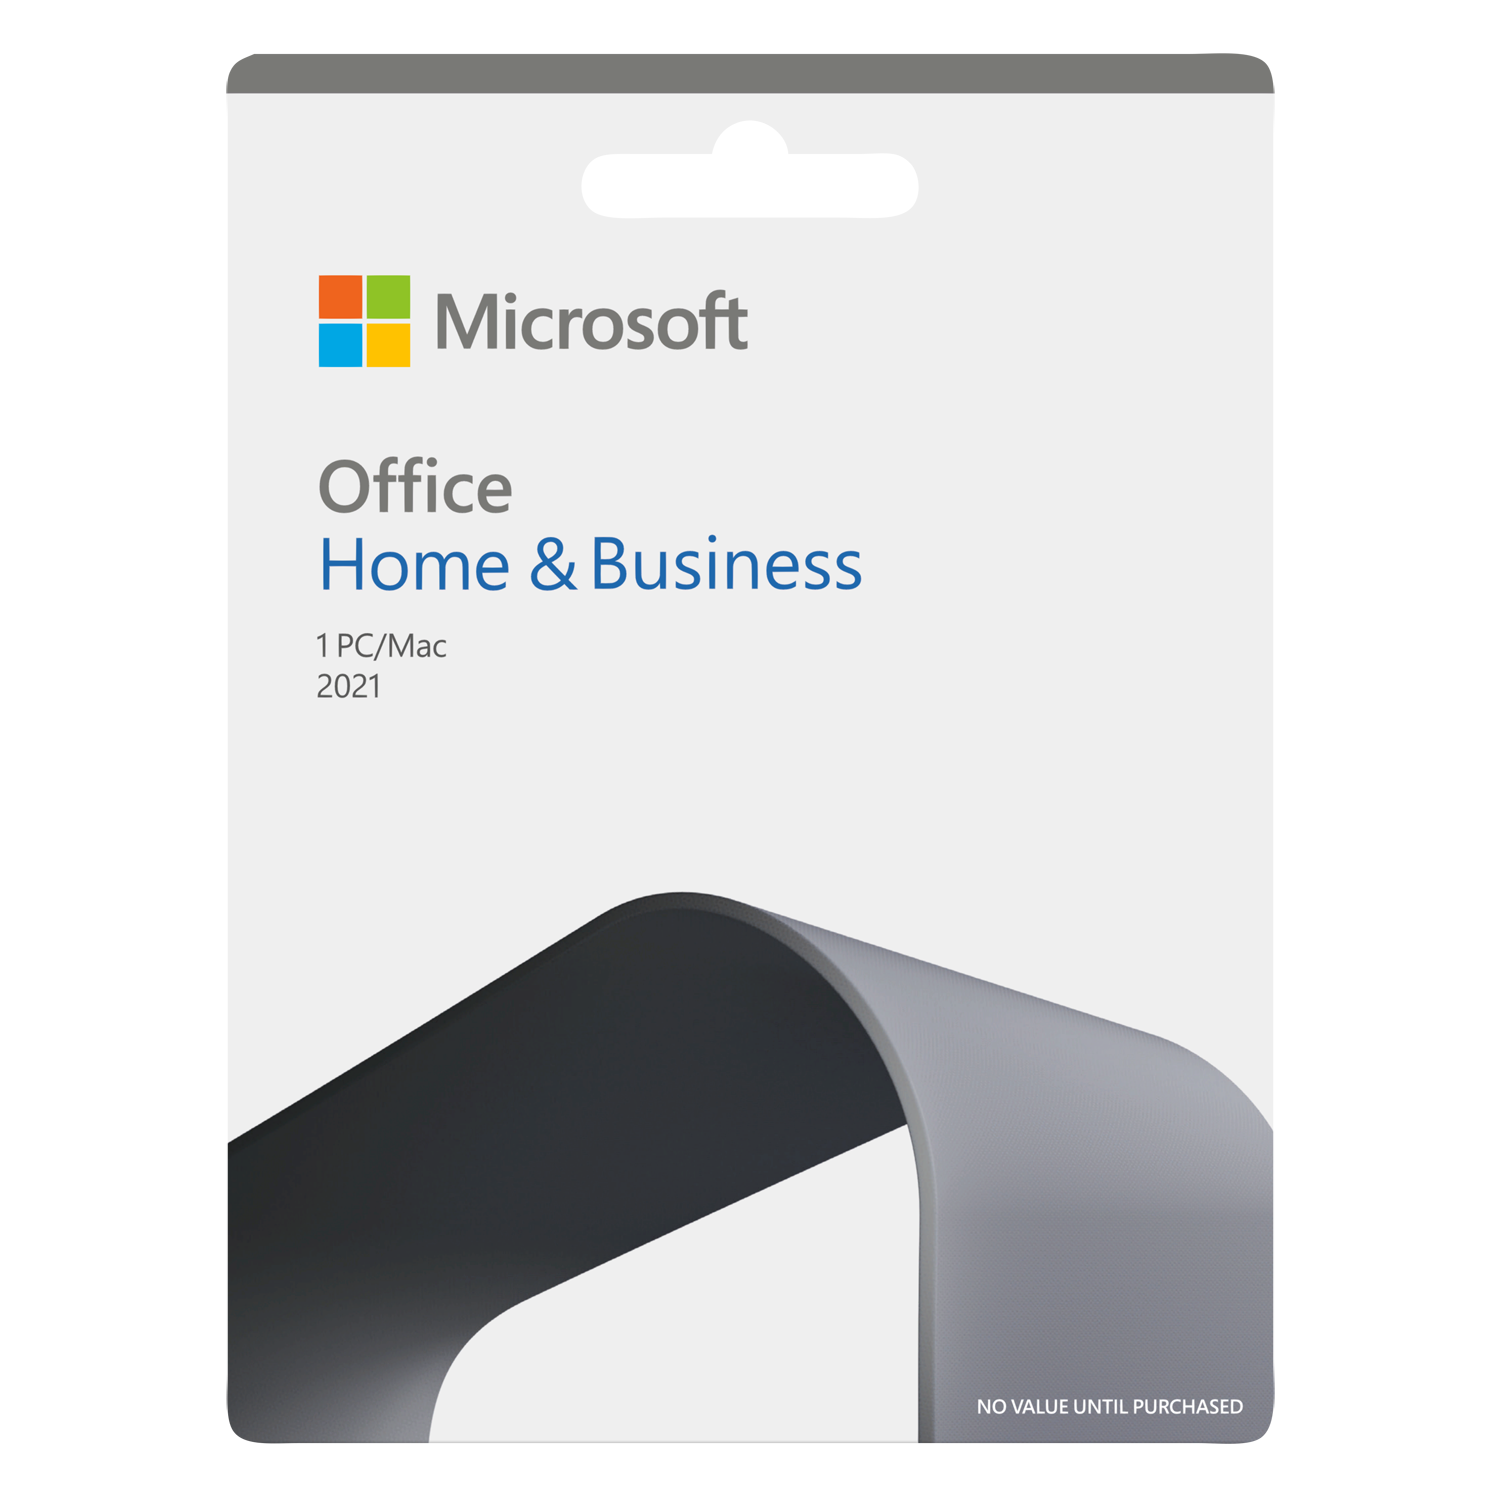 MICROSOFT Office Home & Business 2021 - Laptops Direct